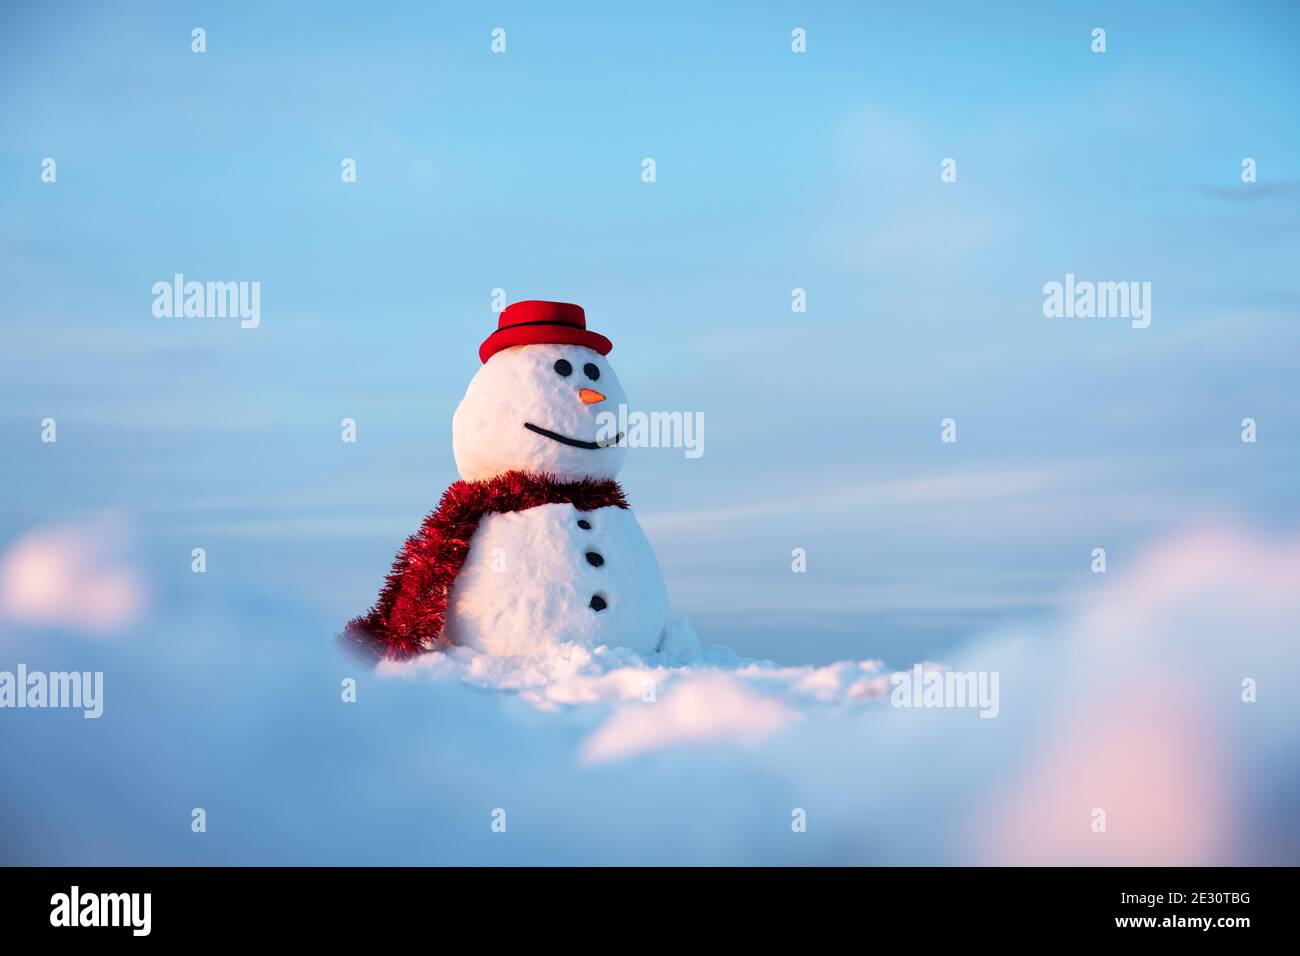 Funny snowman in stylish red hat and red scalf on snowy field. Merry Christmass and happy New Year Stock Photo